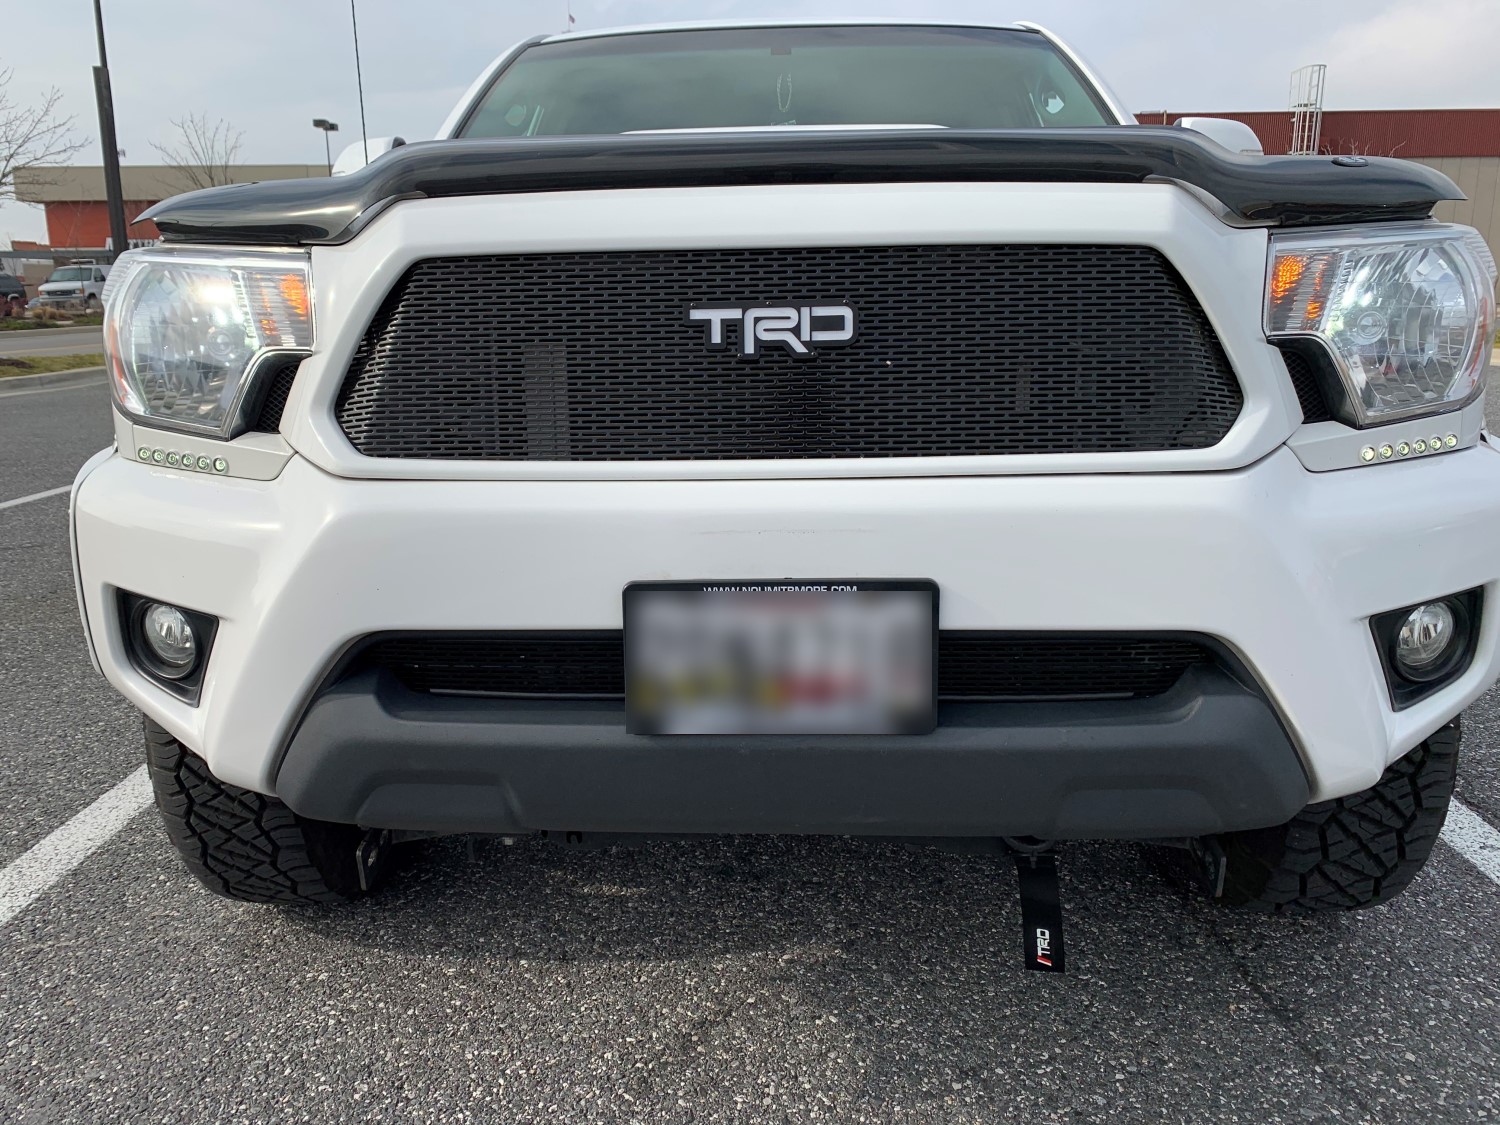 2012 - 2015 Toyota Tacoma Grill Mesh With TRD Emblem #3